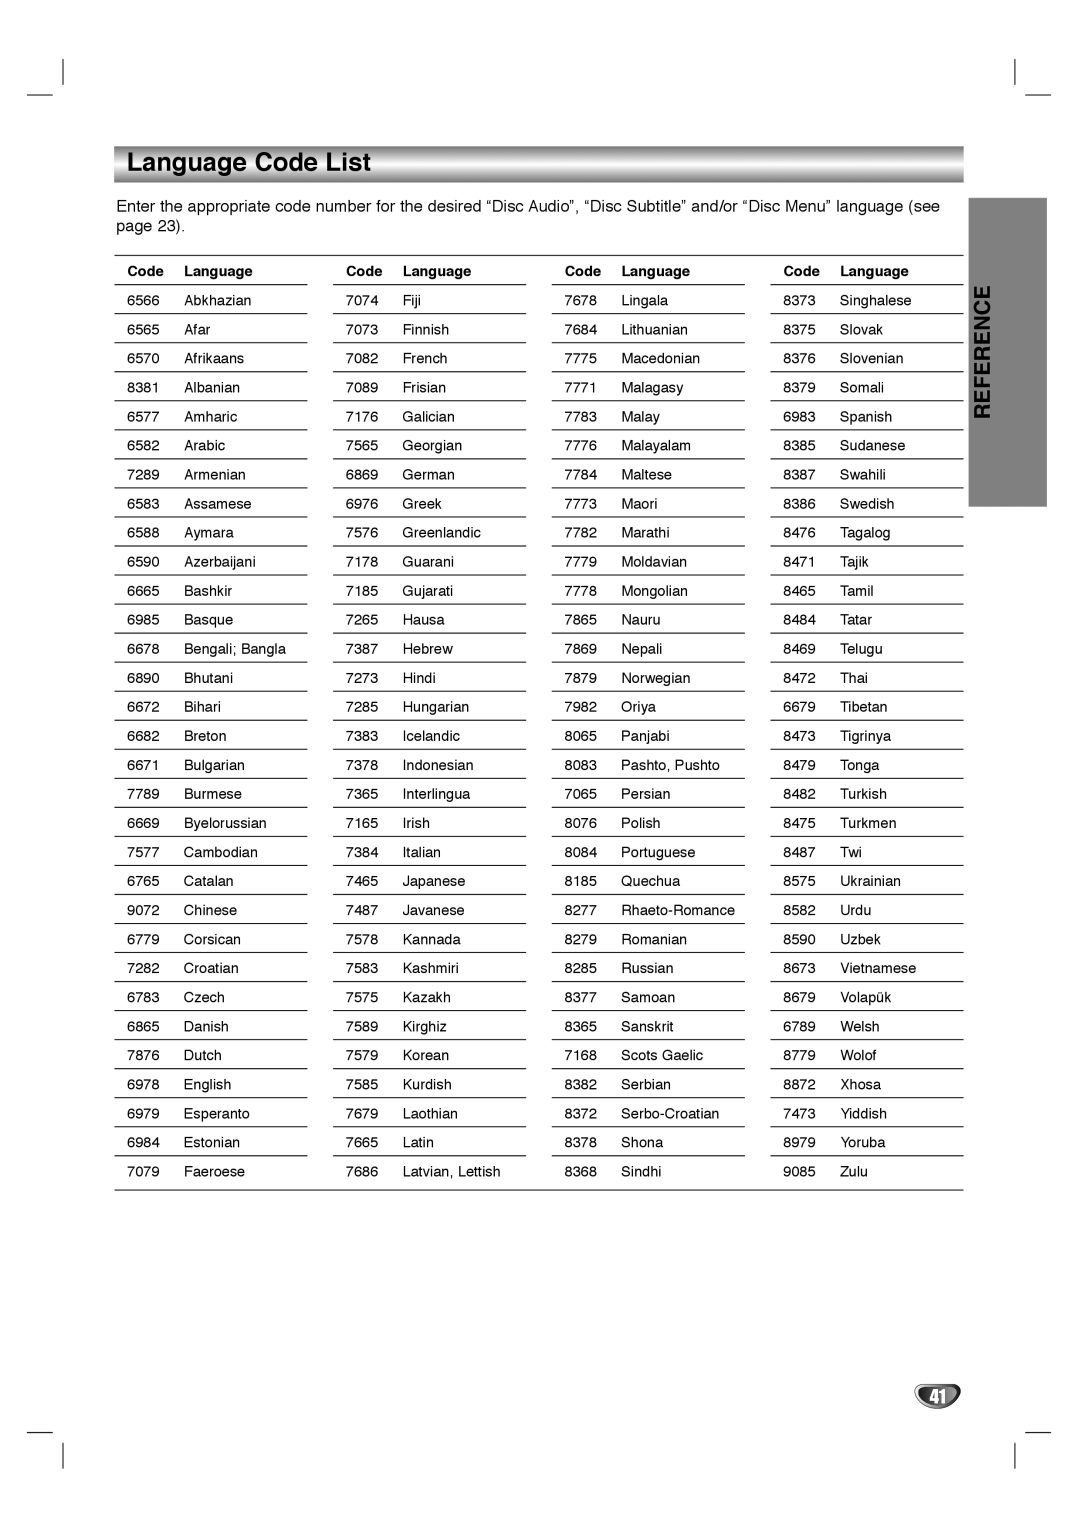 Dolby Laboratories HT2030 manual Language Code List, Reference 